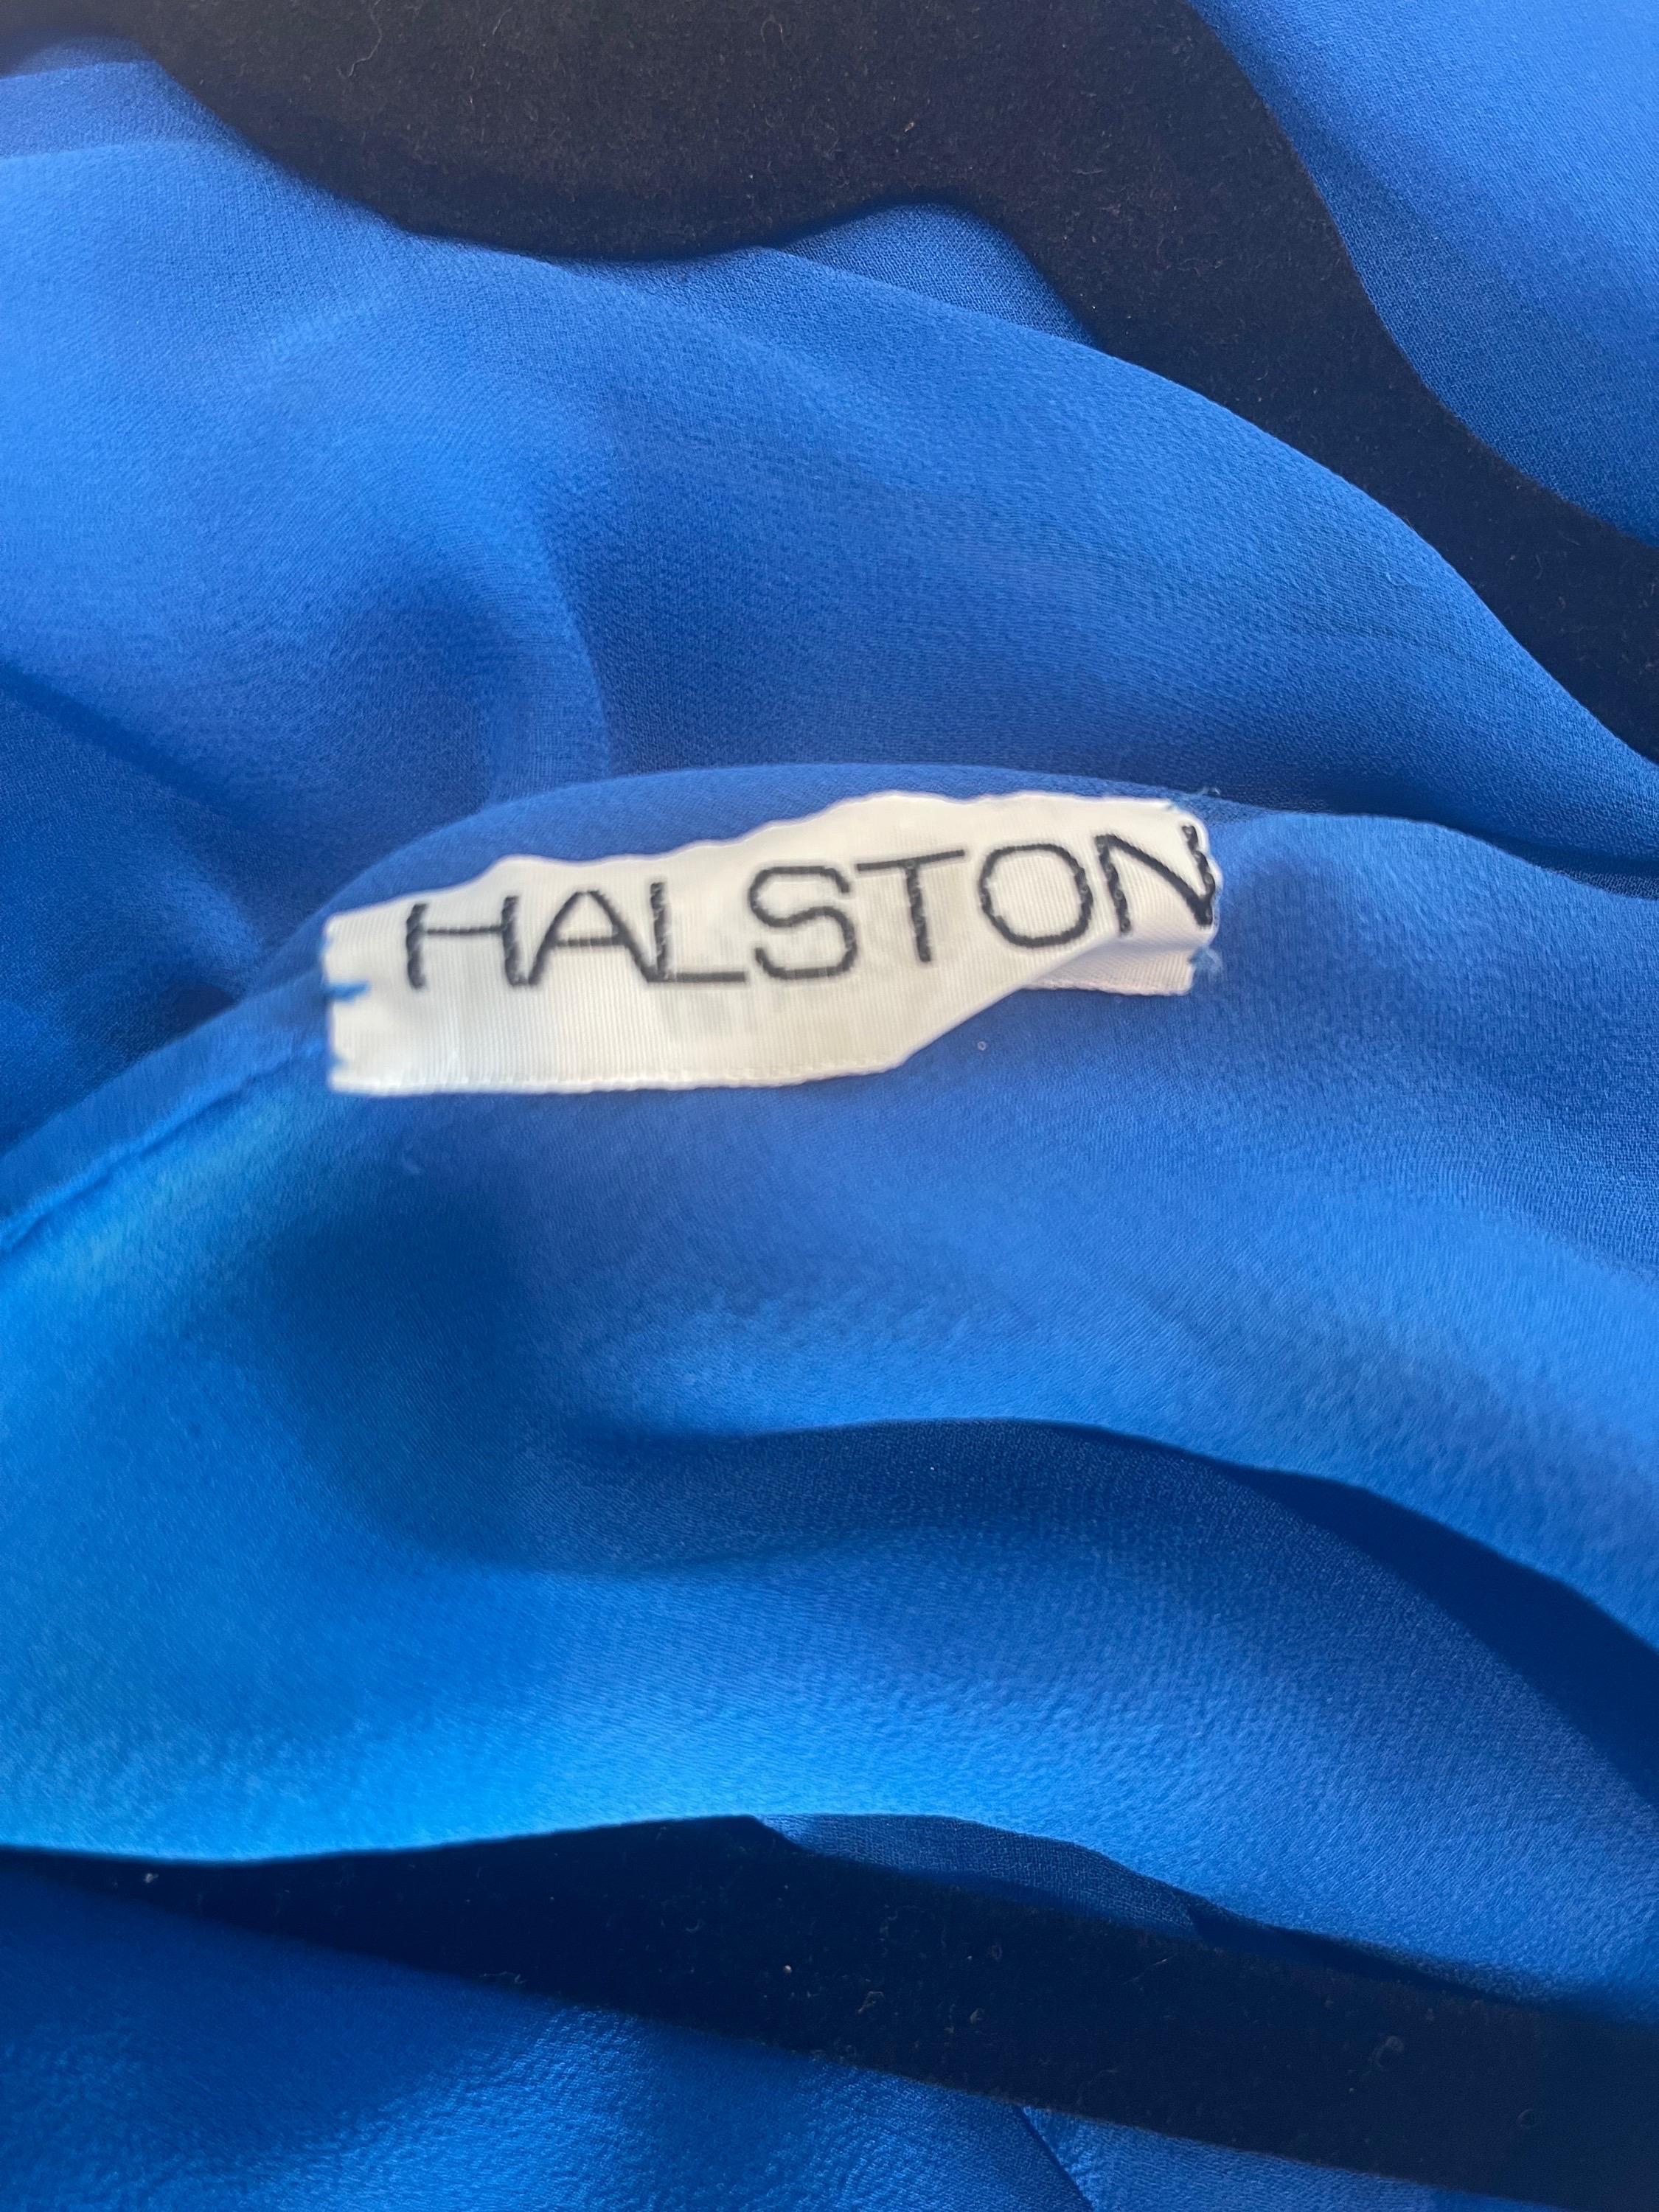 Gorgeous vintage 70s HALSTON Couture cerulean blue silk chiffon goddess gown ! Simply slips over the head. There are multiple layers of the finest silk chiffon that just flow with the wind and movement. An iconic museum worthy piece of fashion